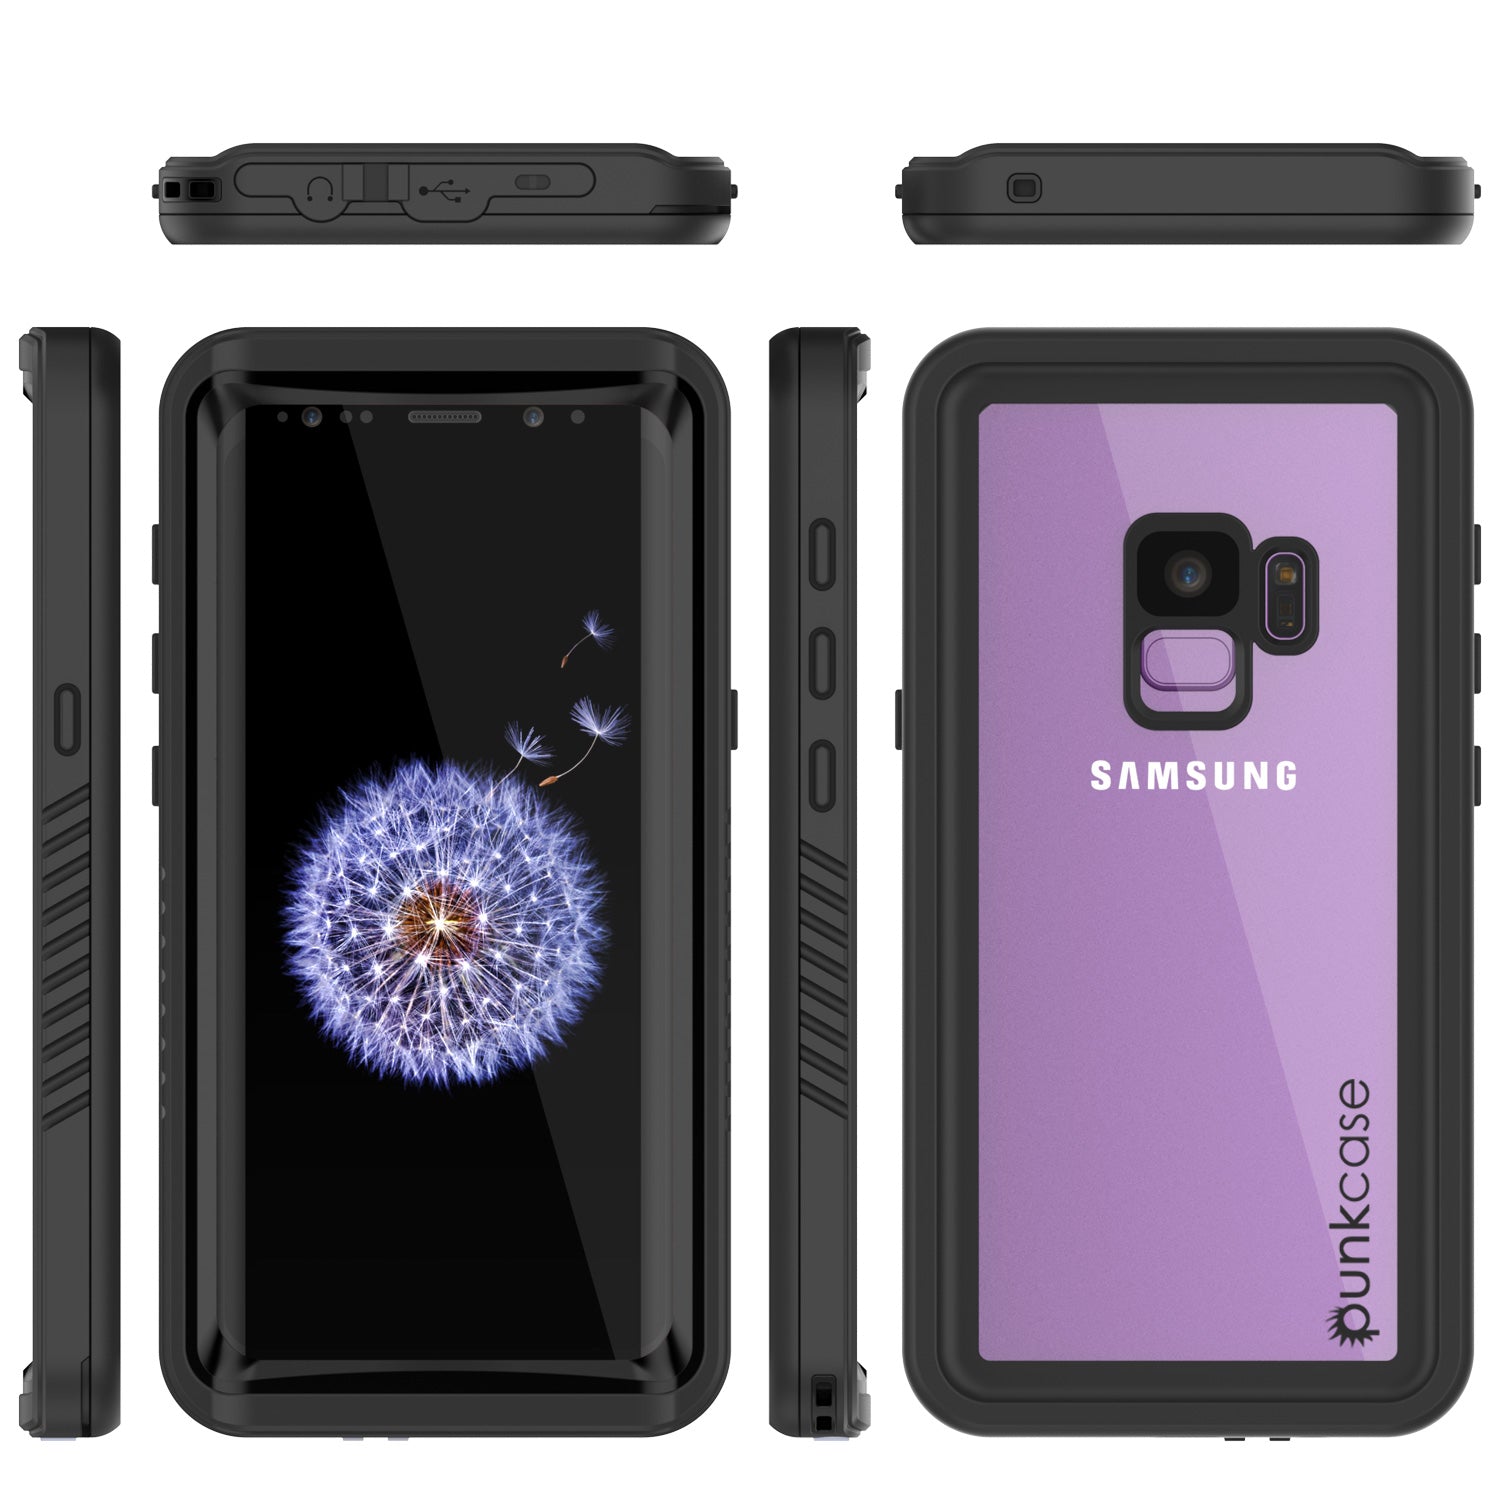 Galaxy S9 PLUS Waterproof Case, Punkcase [Extreme Series] [Slim Fit] [Shock/Snow proof] [Dirproof] Armor Cover W/ Built In Screen Protector [Black] - PunkCase NZ